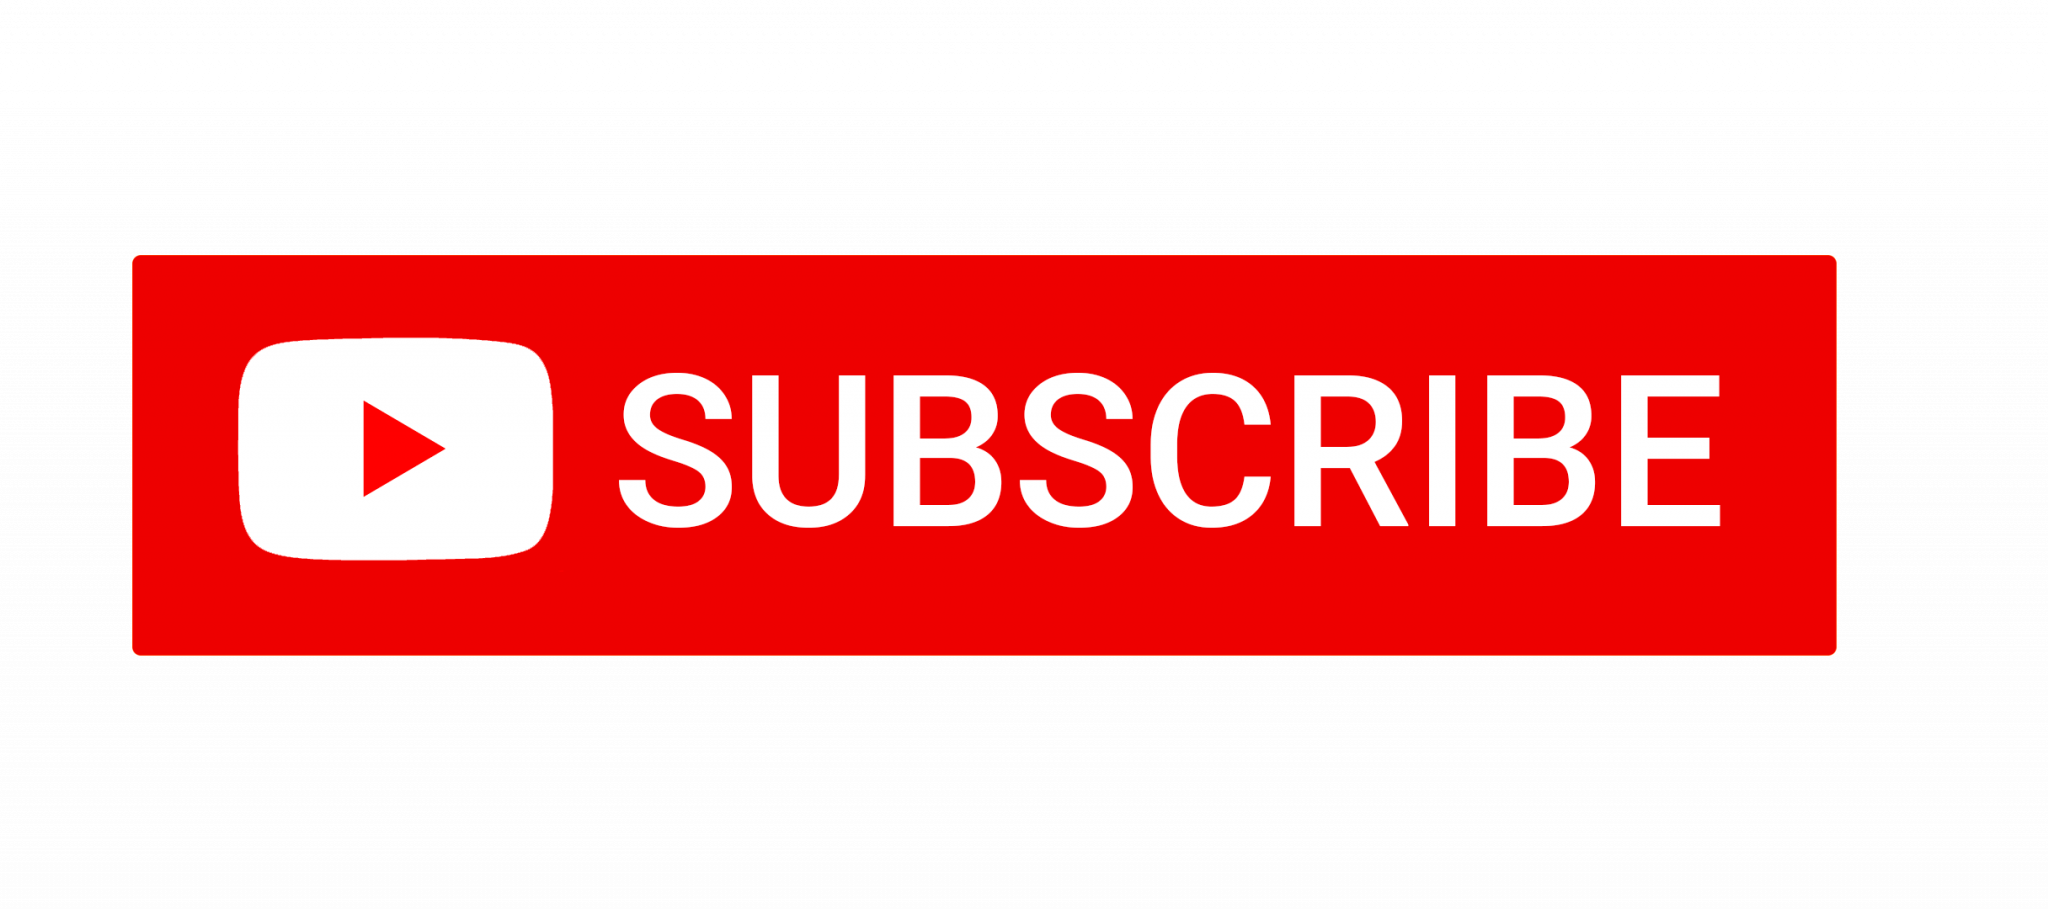 youtube subscribe button animation template free download